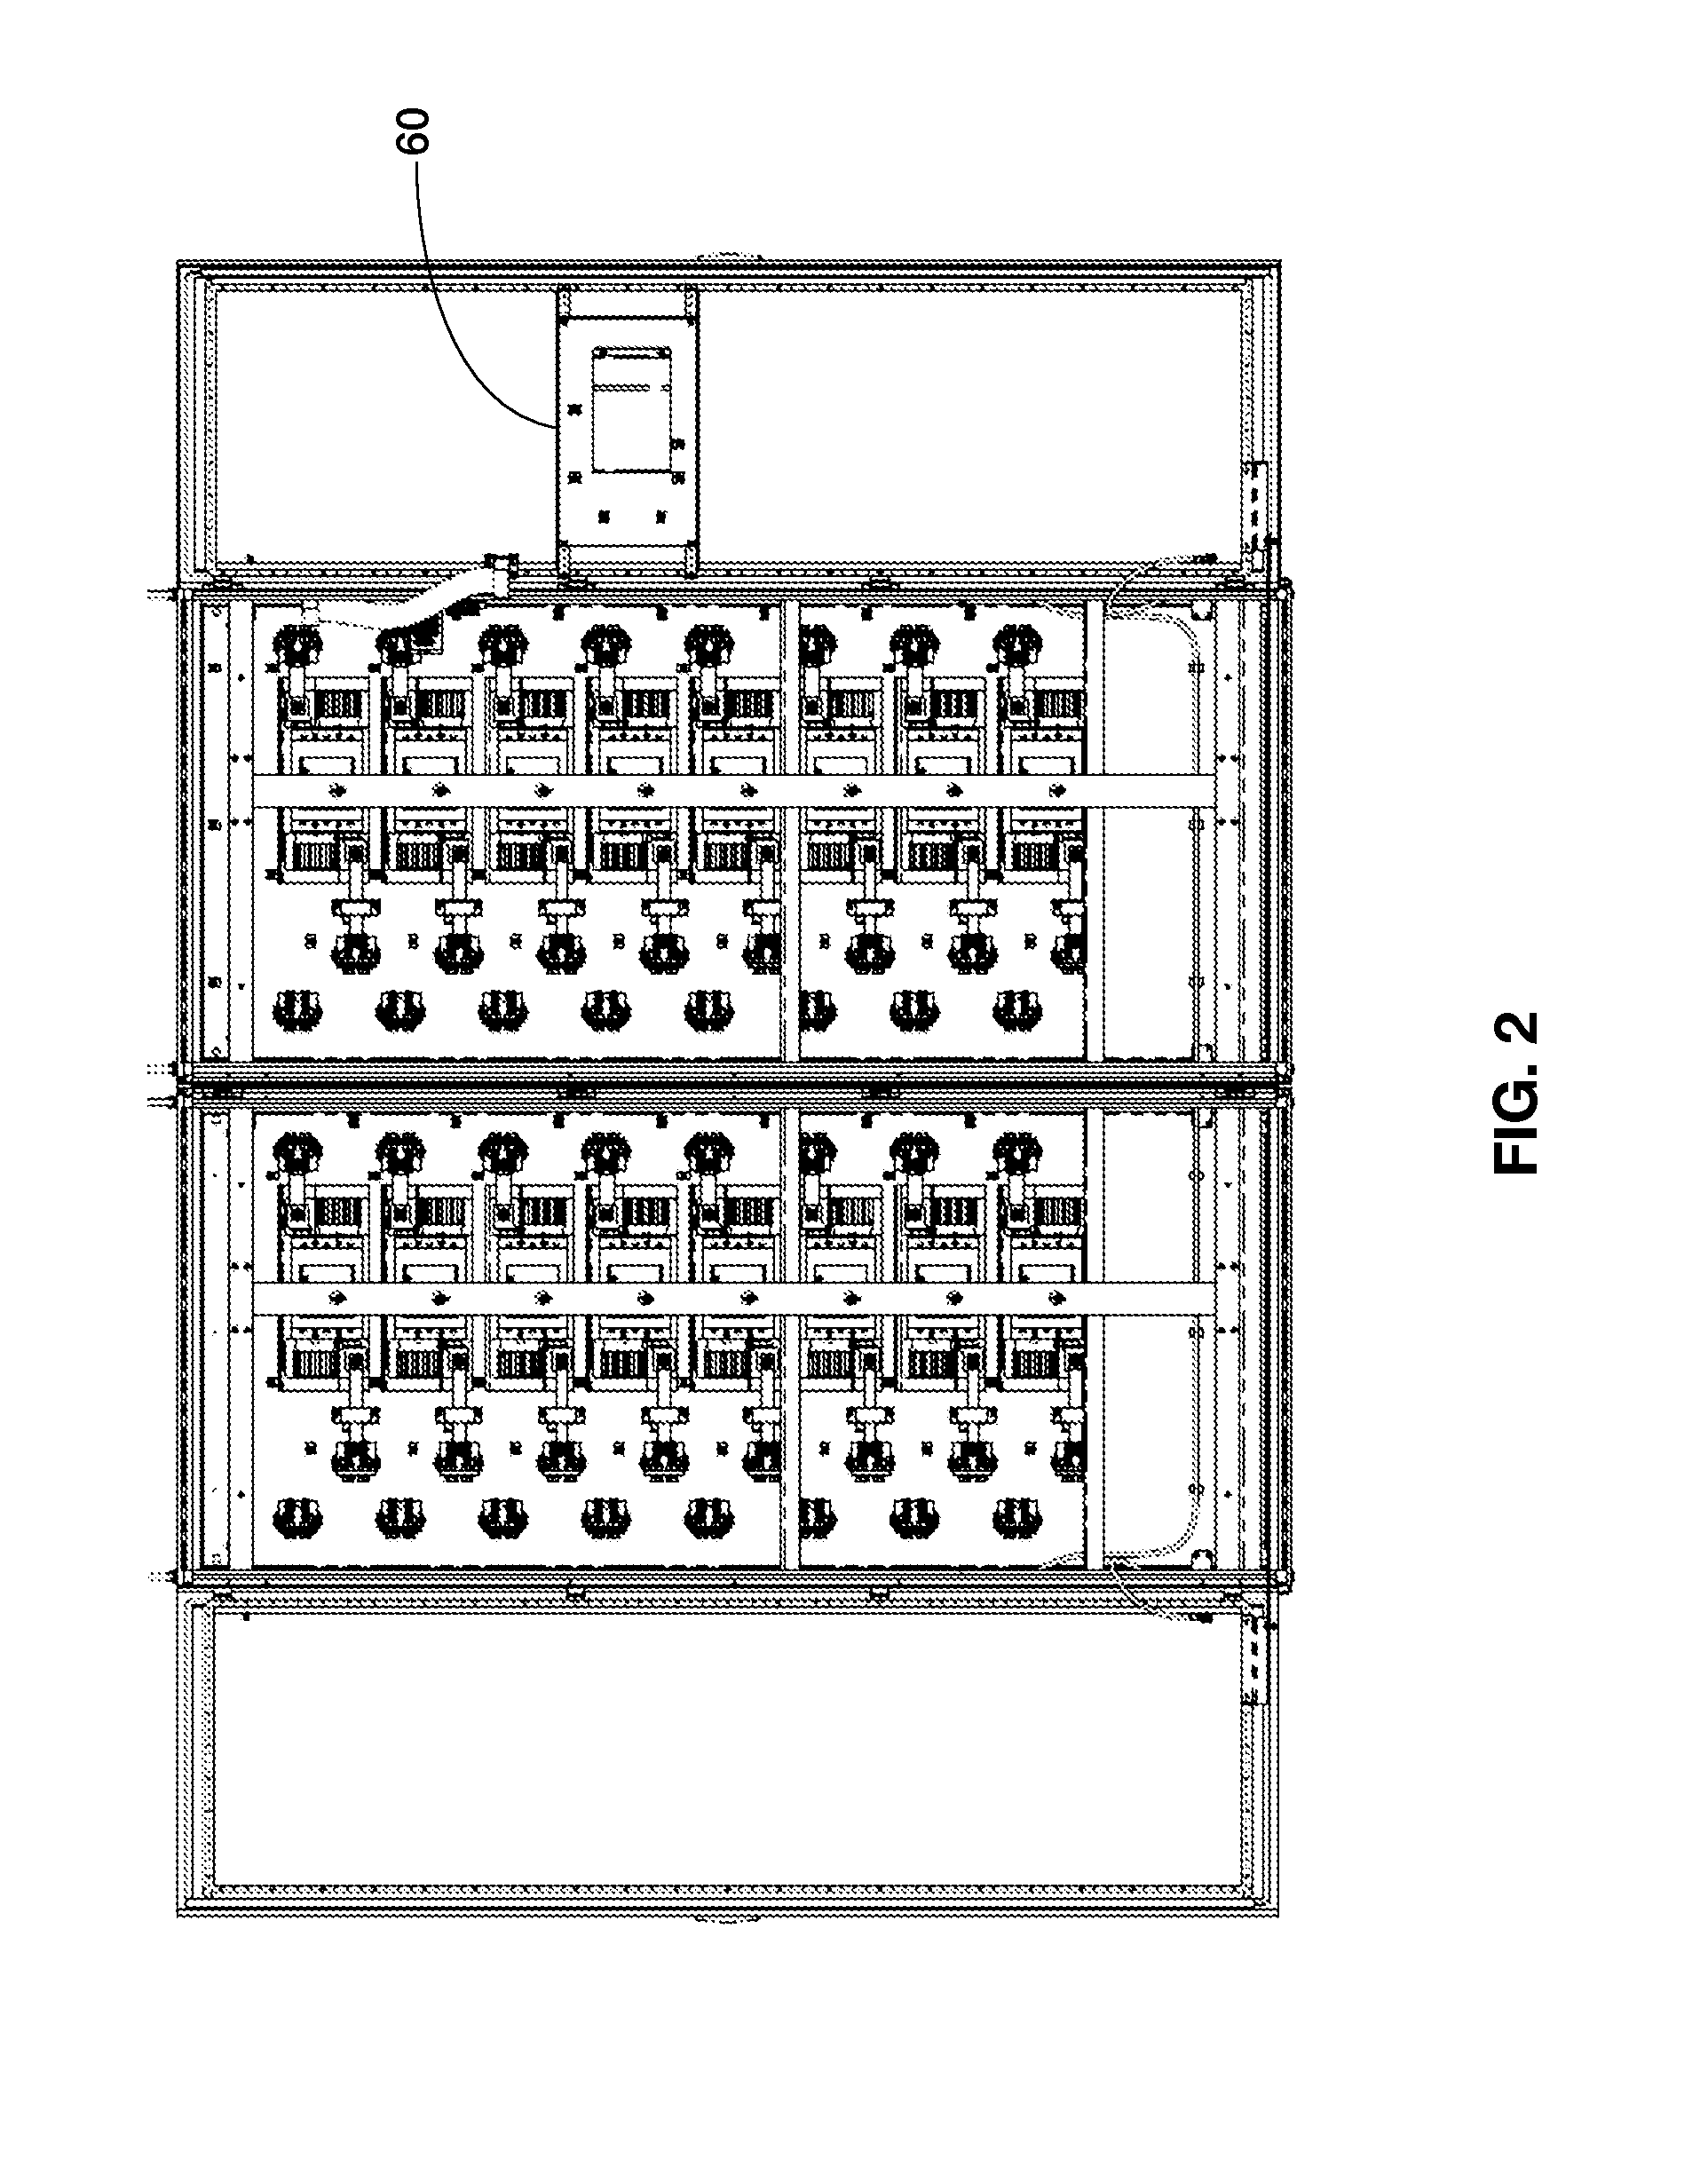 Disconnect cabinet with wireless monitoring capability